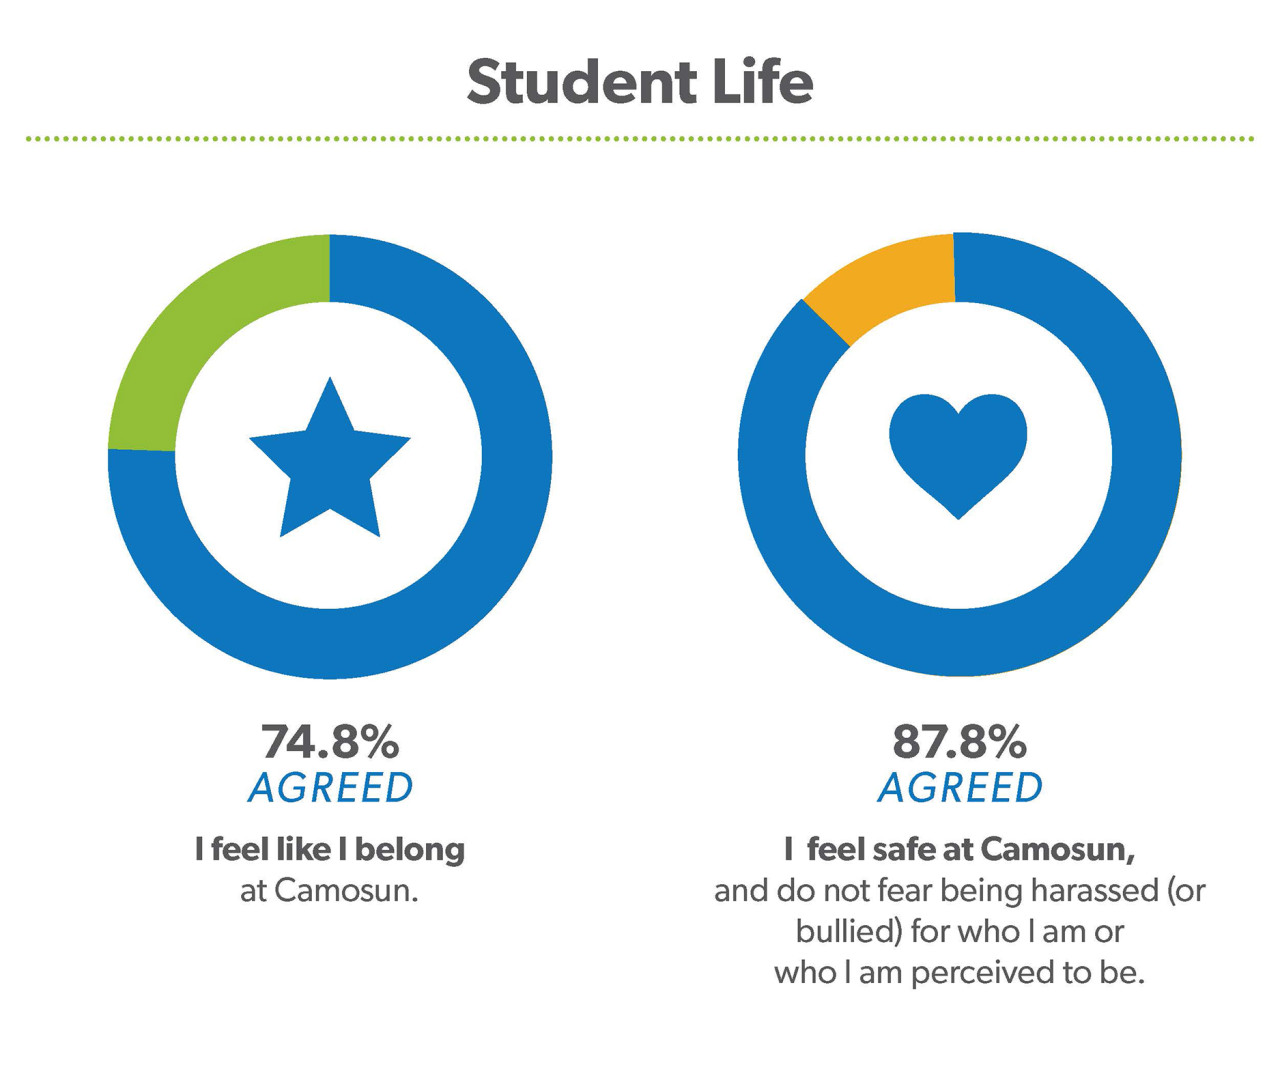 Student Life 74.8% of studnts feel like they belong at Camosun. 87.8% of students said they feel safe at Camosun.